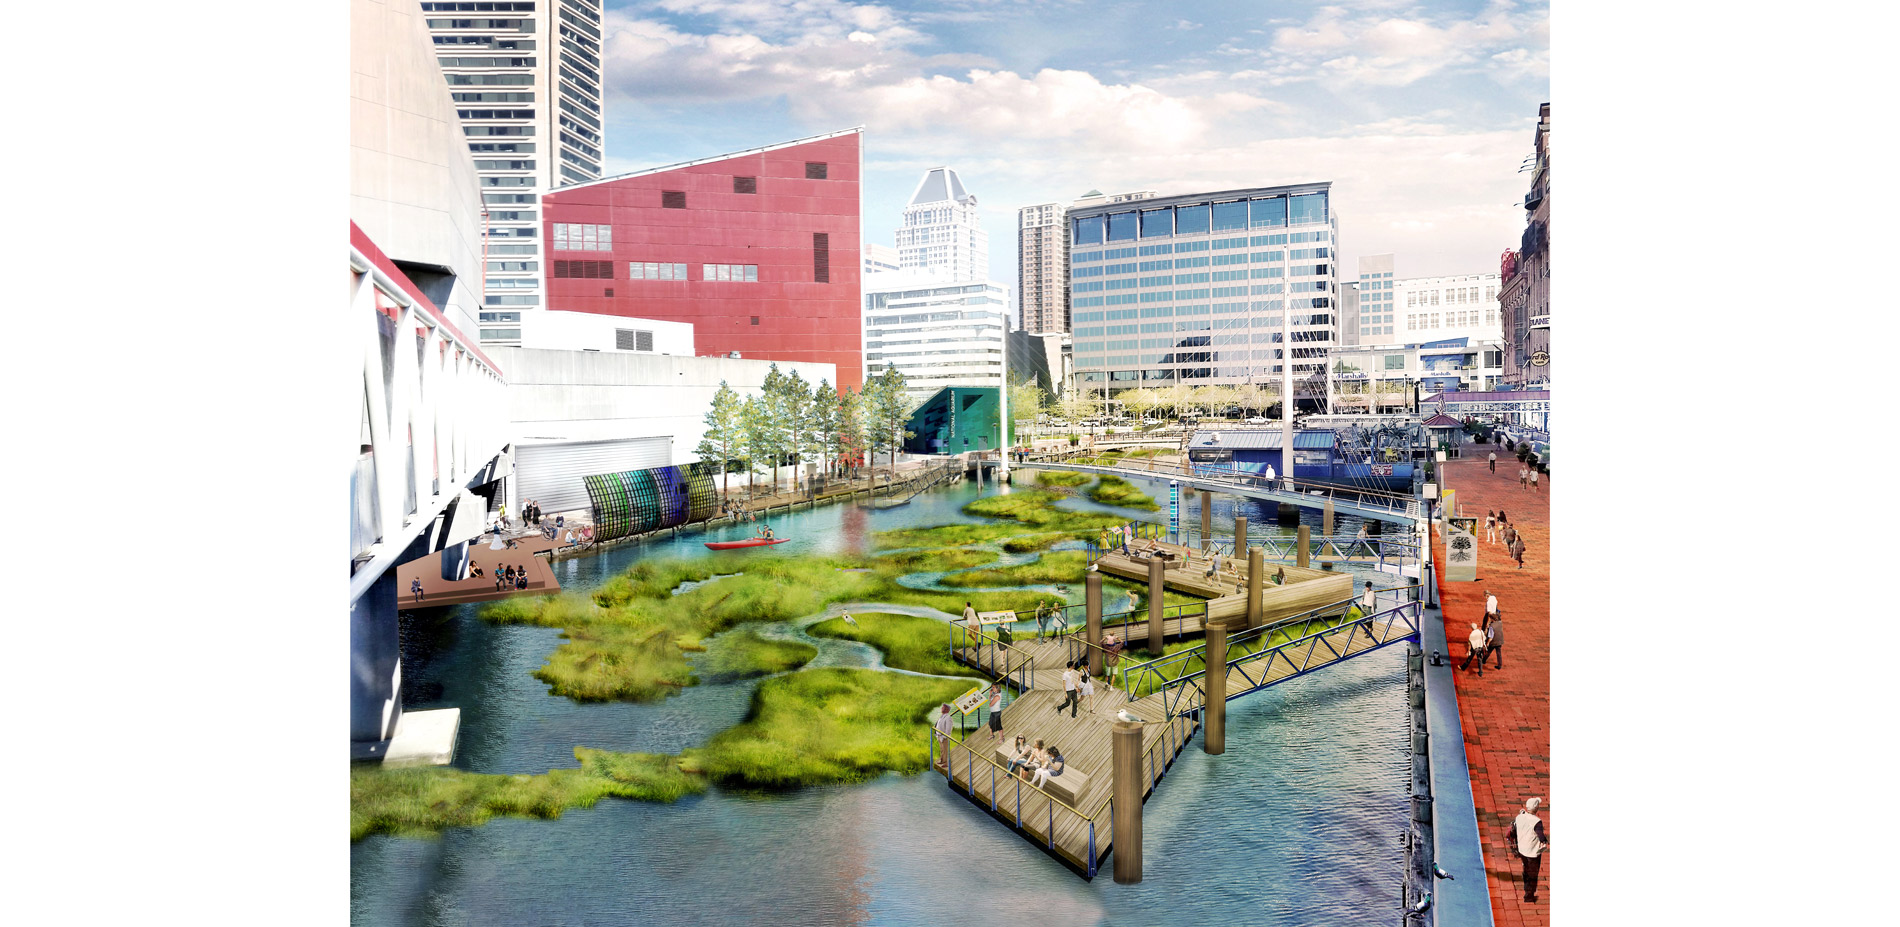 The long-term goals for the National Aquarium are to welcome and engage, inspire conservation action, restore ecosystems, be a living lab, and foster …